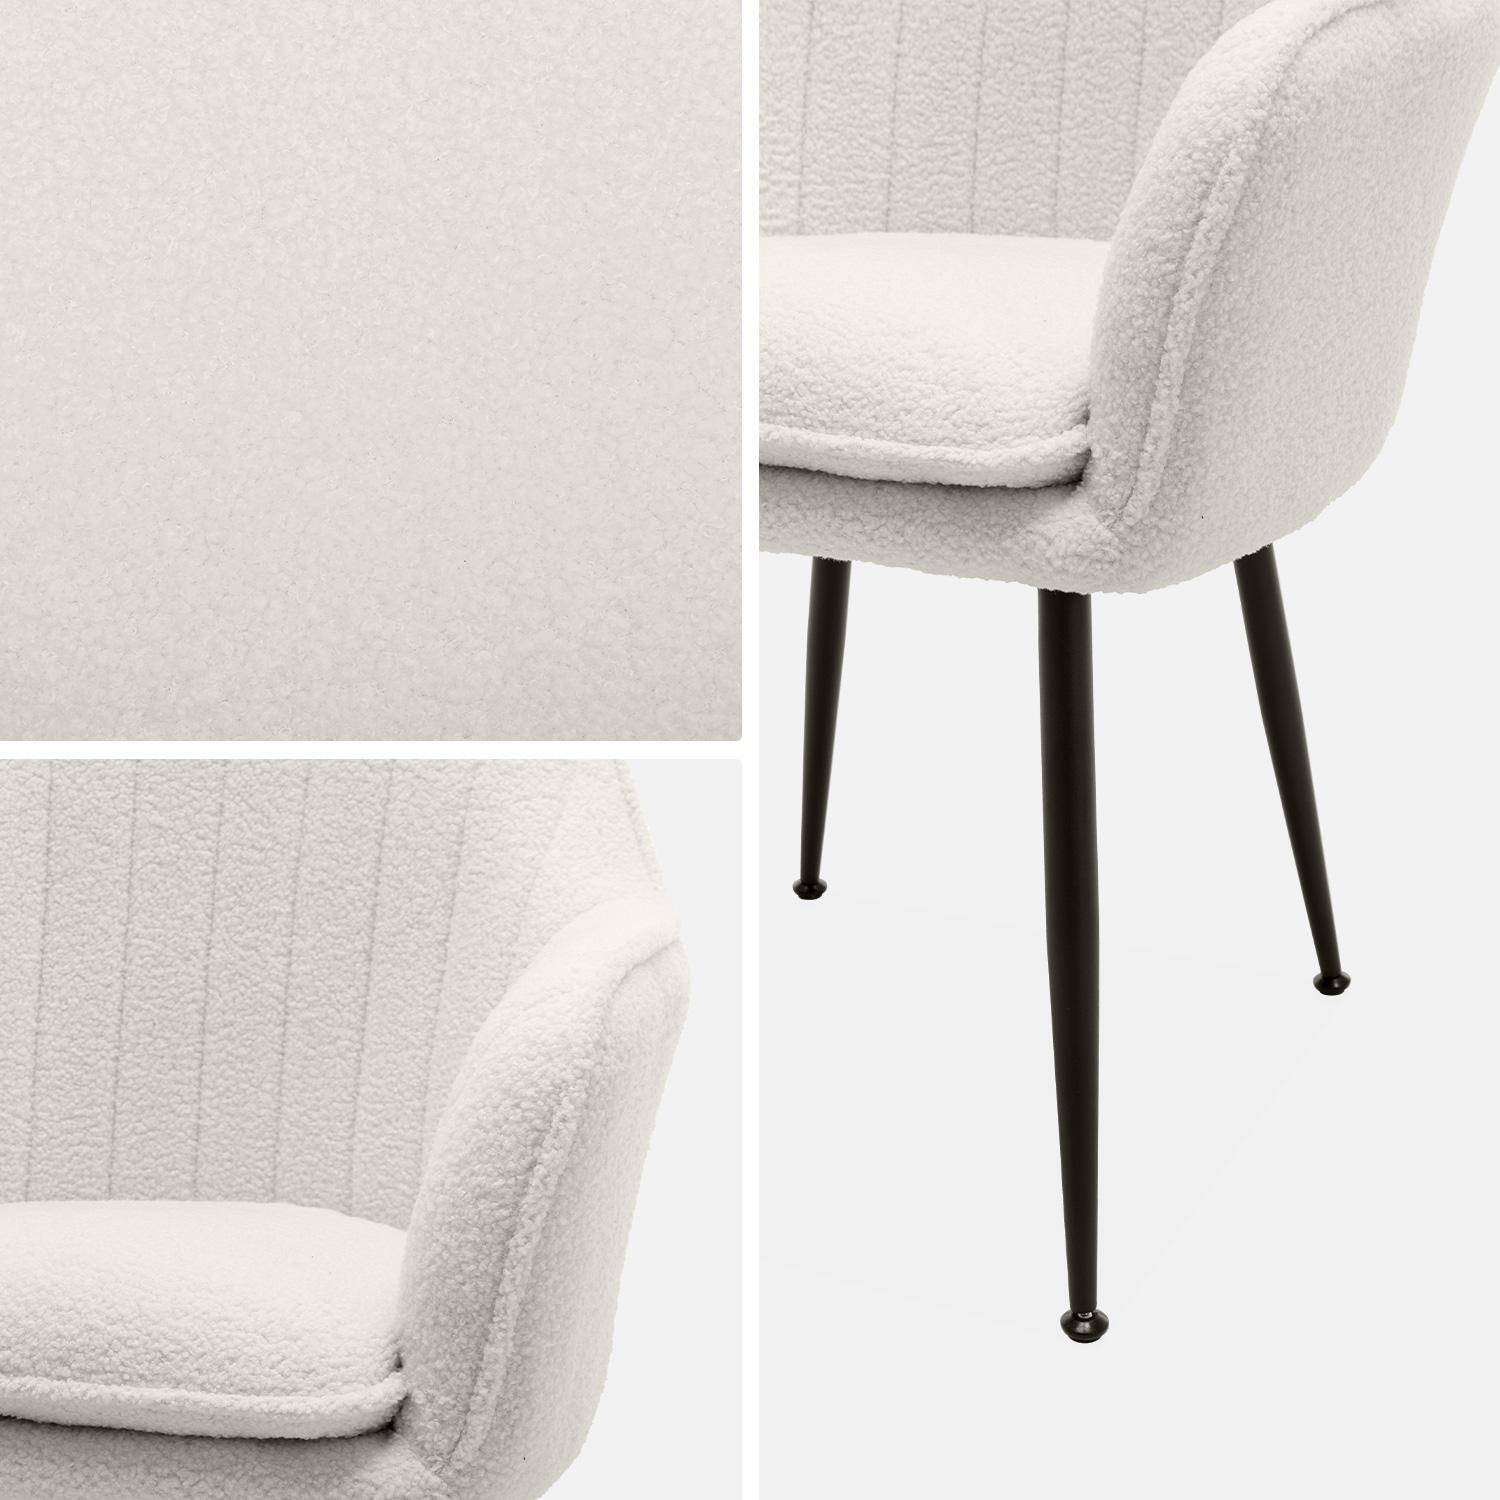 Set of 2 Boucle armchair with metal legs, 58x58x85cm - Shella Boucle - White Photo5